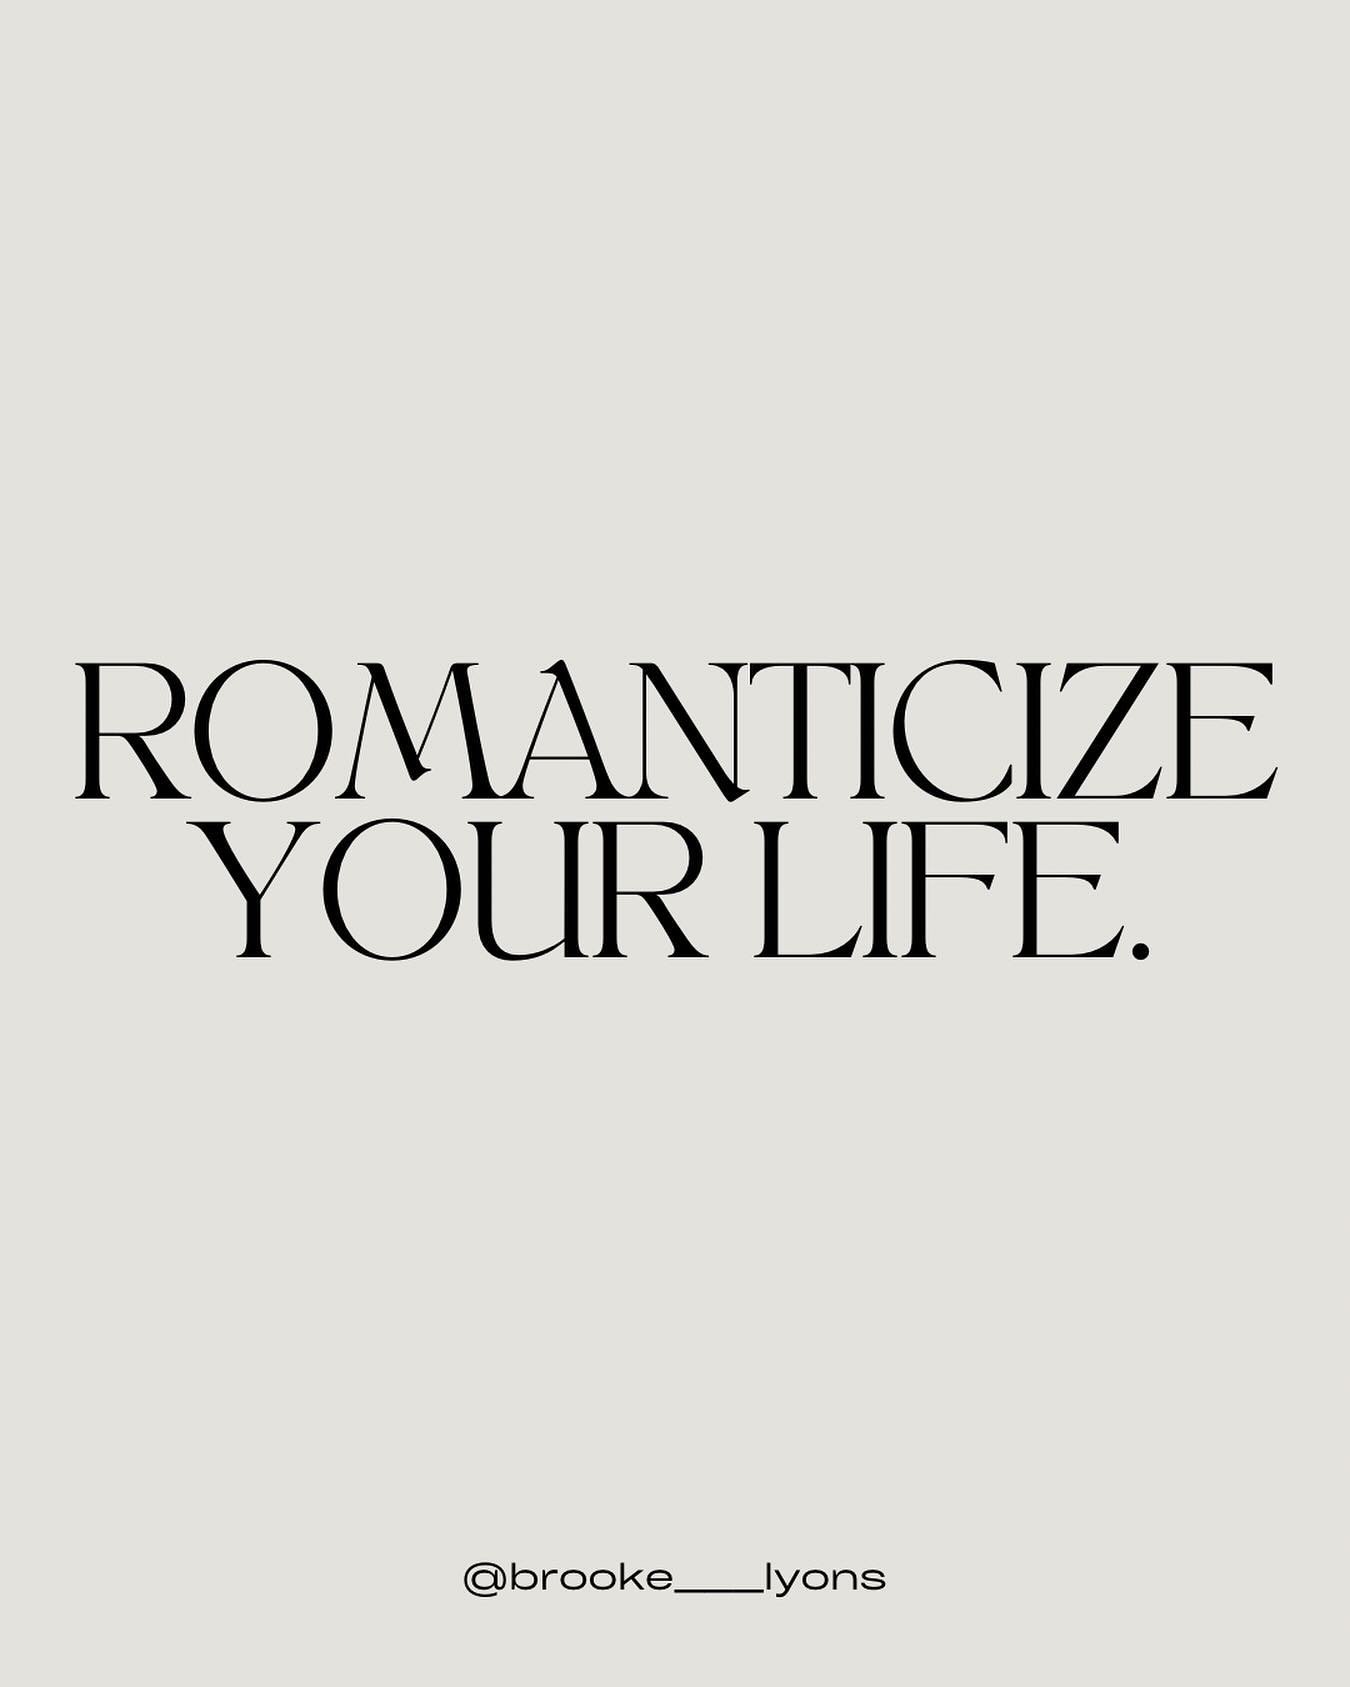 romanticize your life. light candles in the morning. enjoy fruit in the sun. day dream. listen to the birds outside your window. get dressed up just for you. cook an extravagant meal. buy yourself flowers. crawl back in bed for a long afternoon nap. 